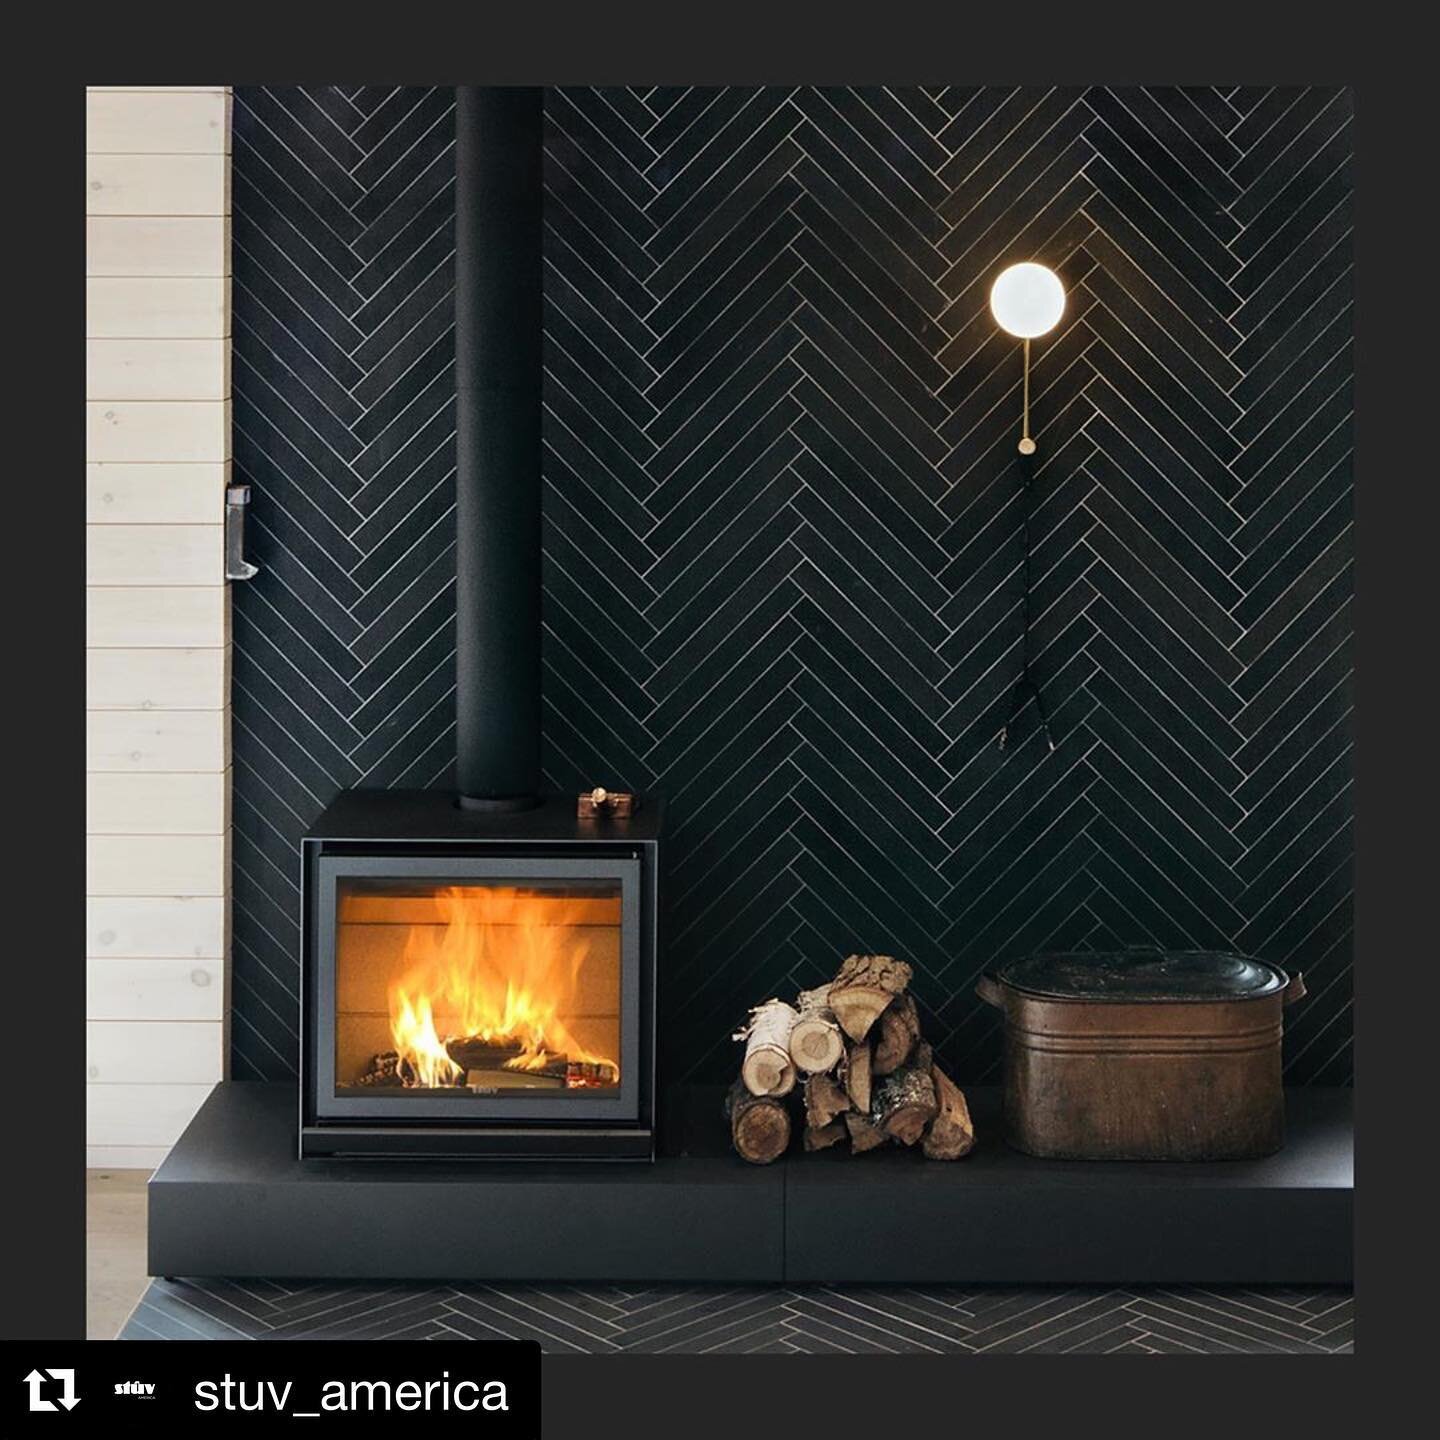 So much coziness in this scene conjured by @vfarchitect. Heat brought to you by @stuv_america 🔥 Sexy sconce brought to you by @objectinterface 💡
・・・
・・・
#Repost @stuv_america with @get_repost
・・・
St&ucirc;v 16-68 cube
The Cabin 
Architecture: @vfar